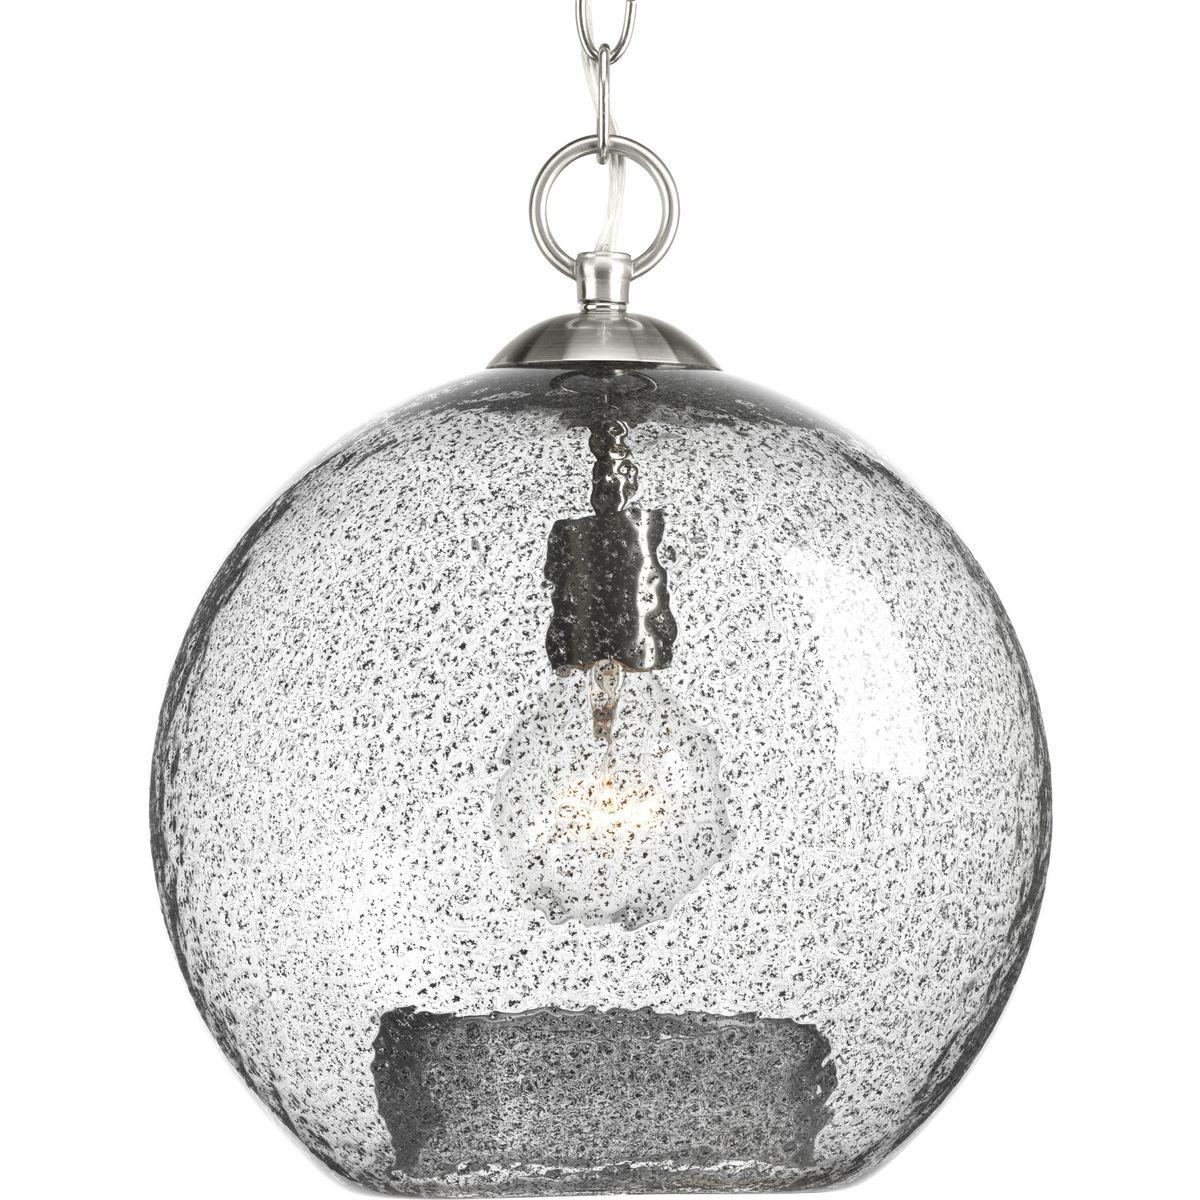 Hubbell P500063-009 Clear textured Artisanal glass and high quality craftsmanship offers a signature focal point in the Malbec pendants. Create a customized look - suitable for designs from Bohemian to Coastal - by grouping several pendants together in a kitchen, entryway or